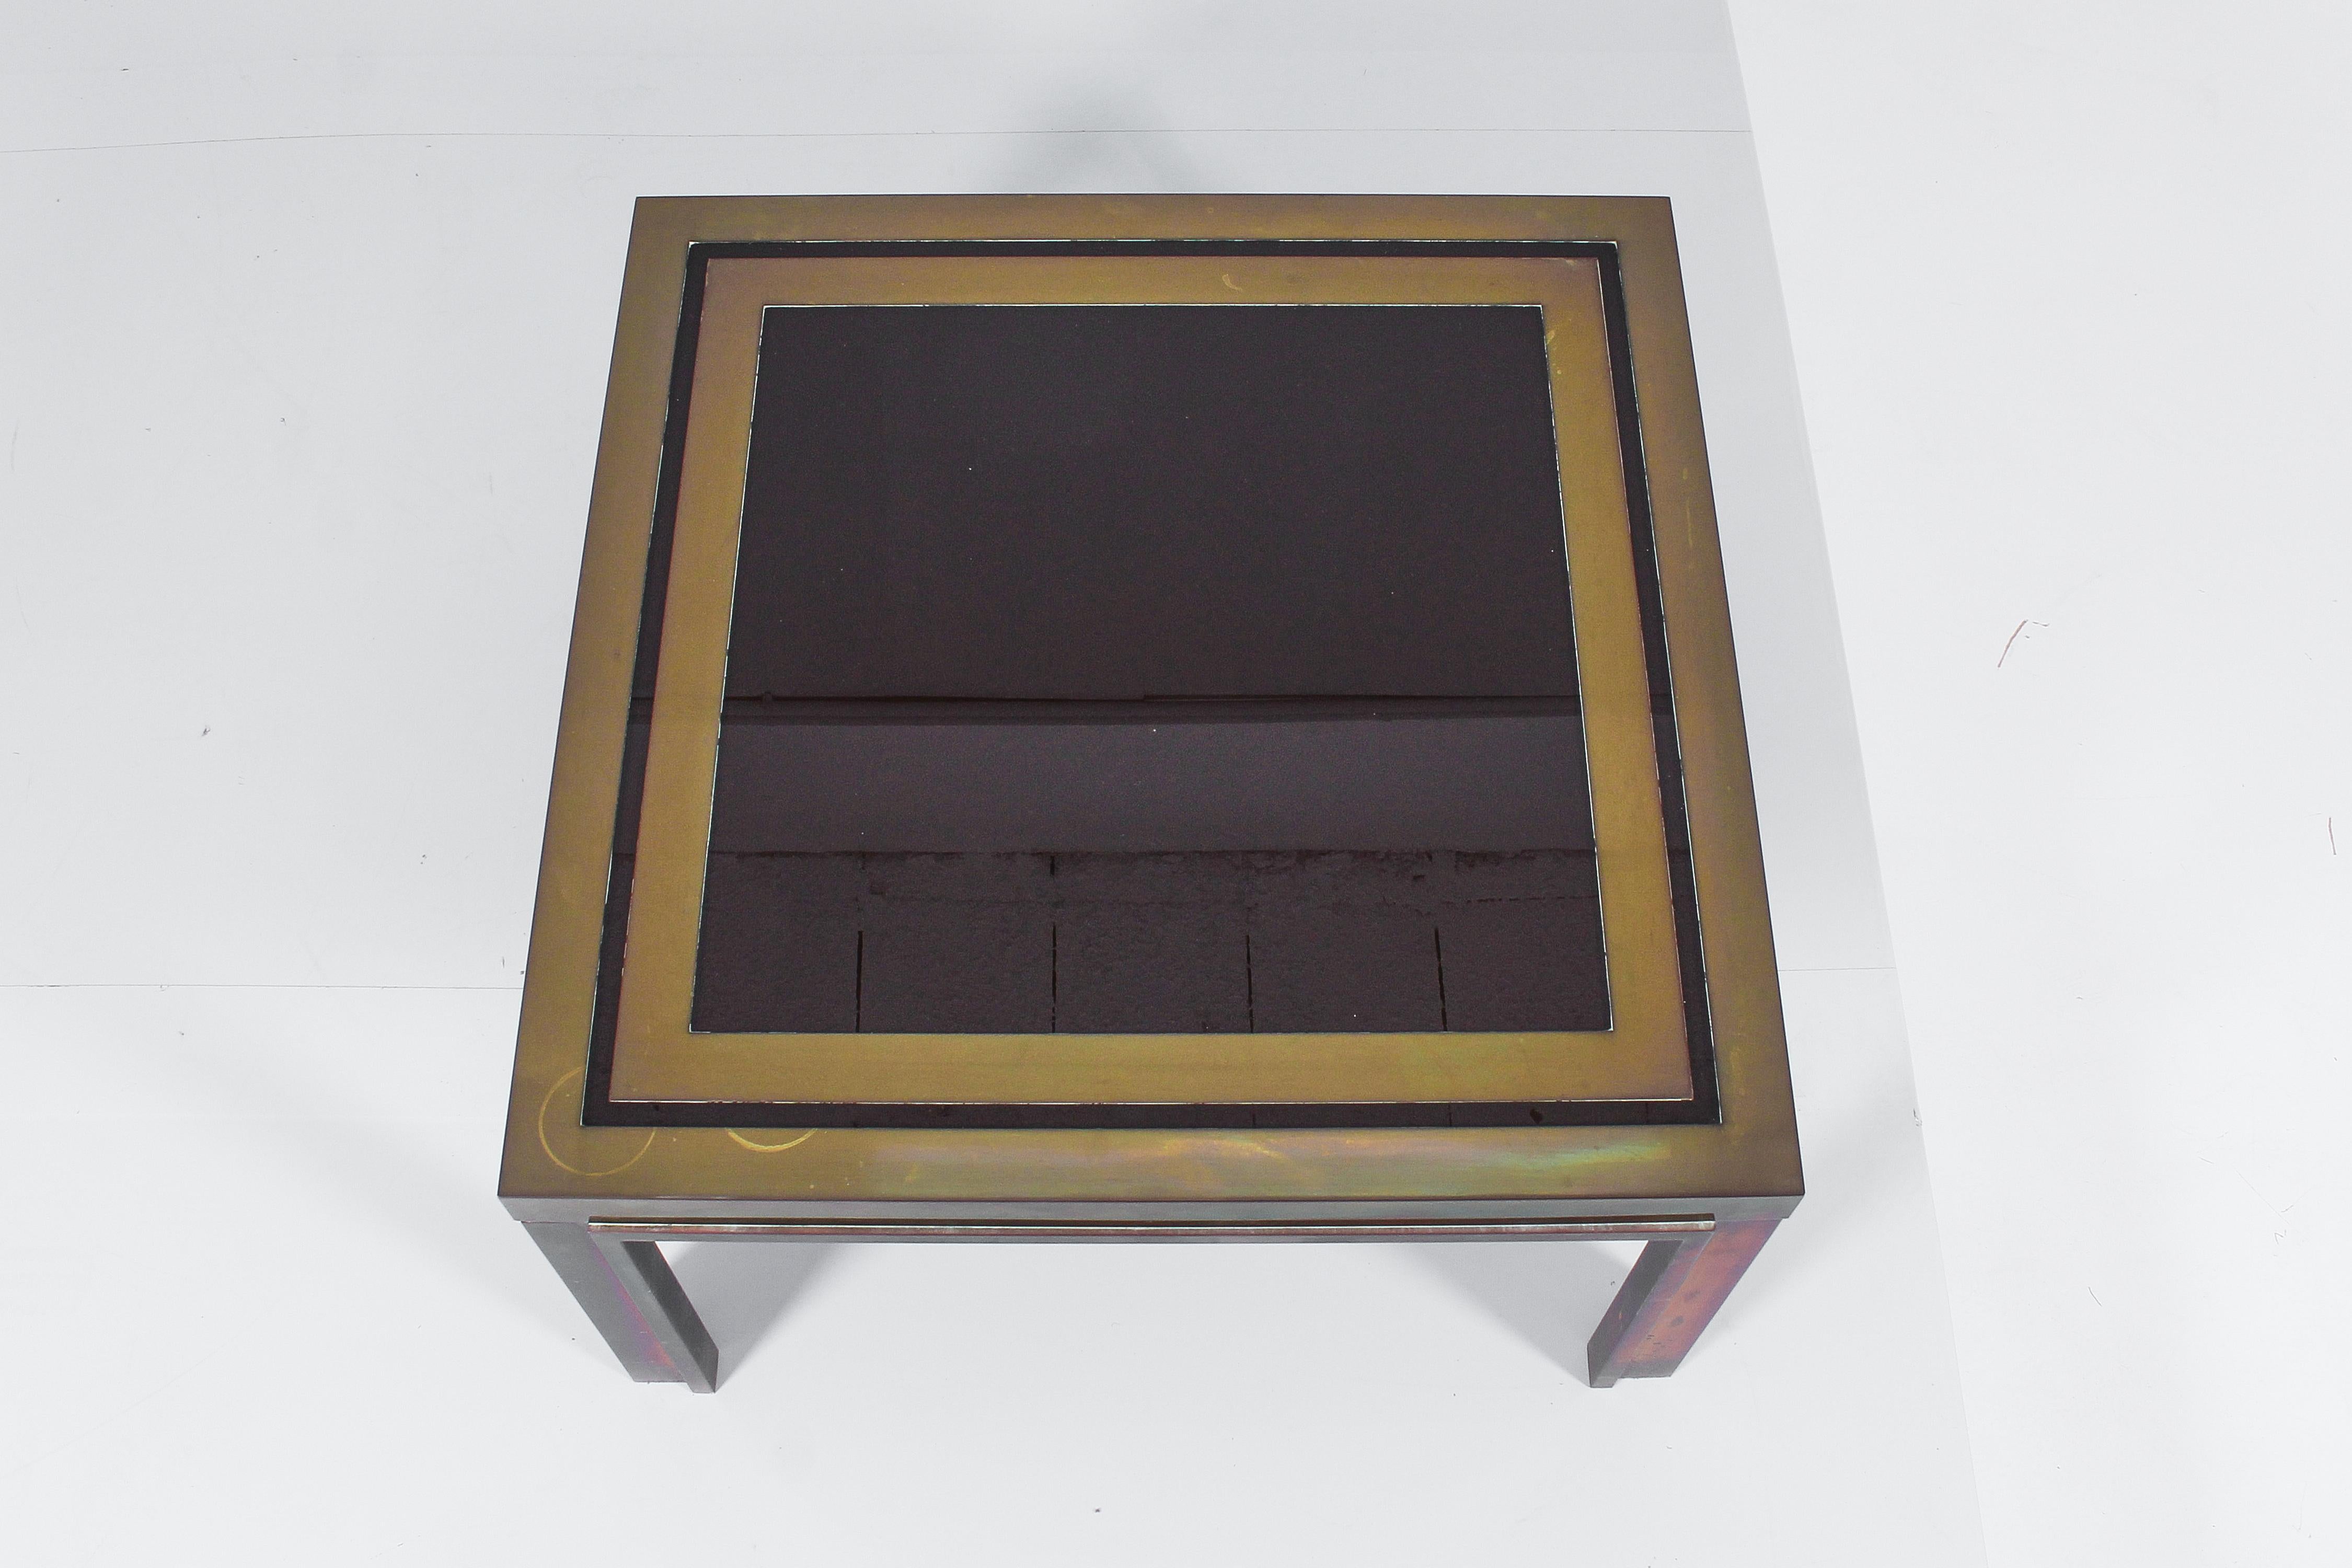 Midcentury Maison Jansen Brass and Dark Glass Coffee Table 70s, France For Sale 2